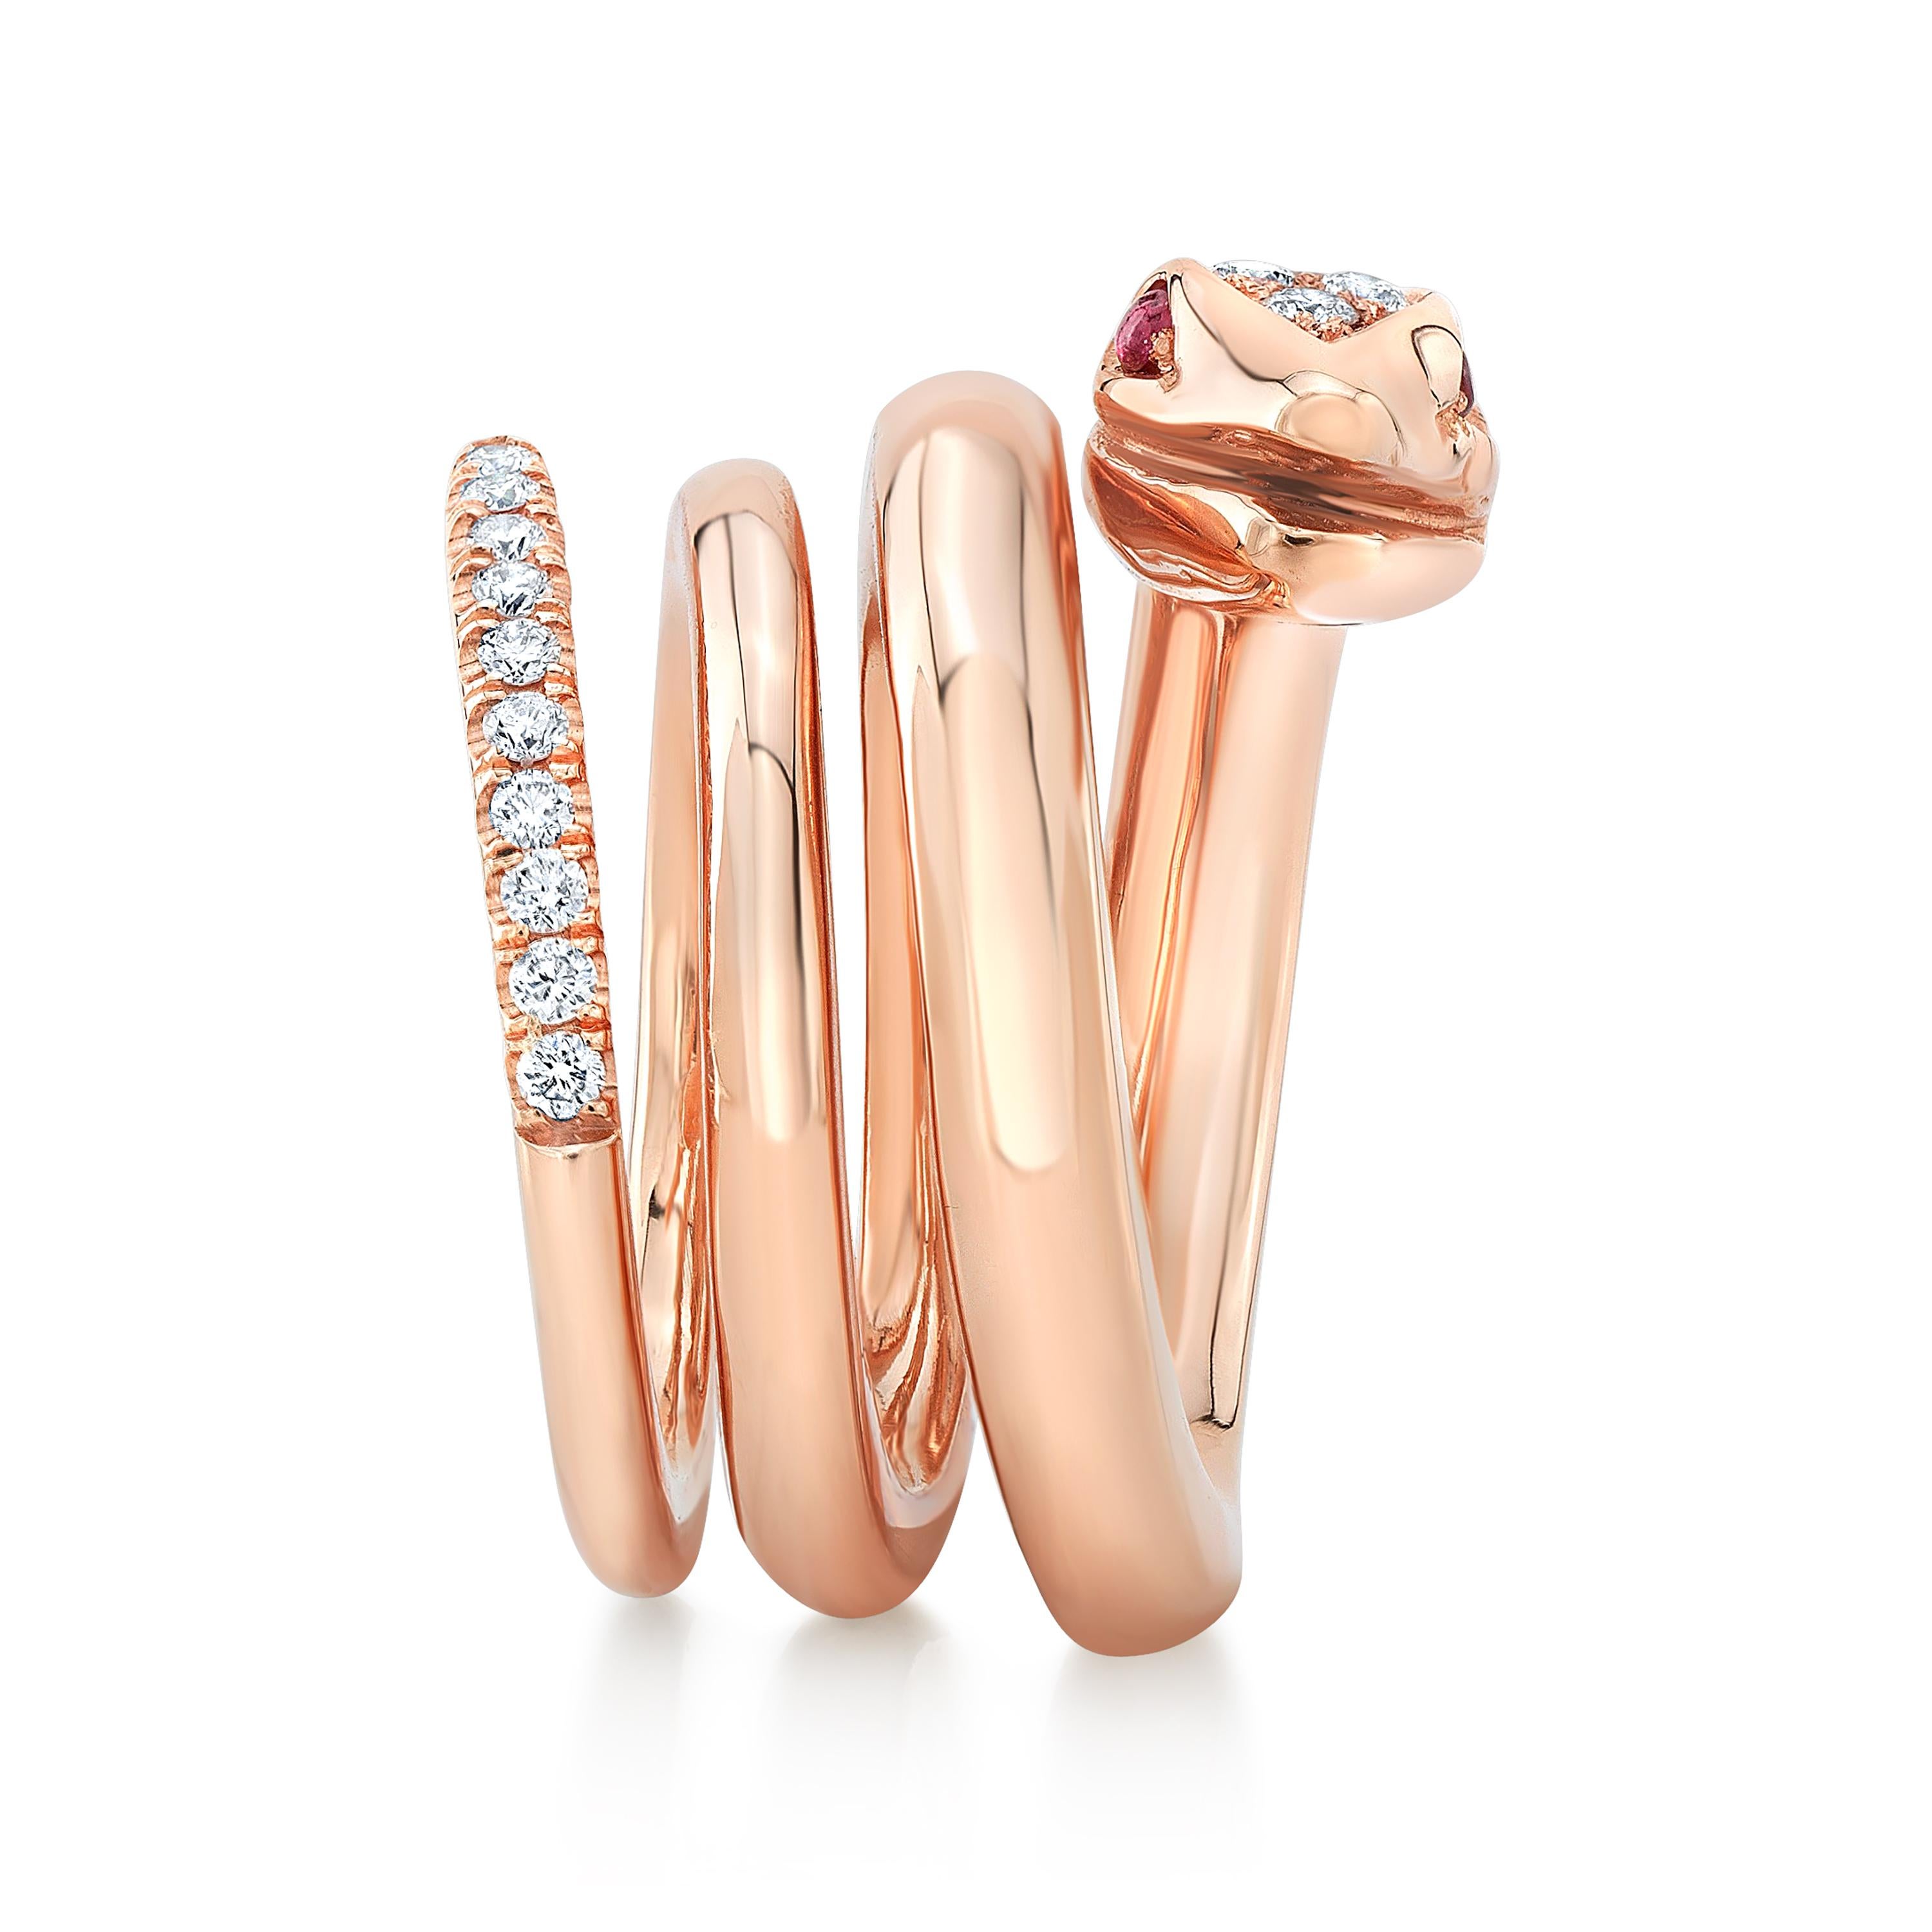 Amy's 18K-rose gold, diamond and sapphire serpent ring 'Sydney' is a fabulous replica of this lovely animal in nature. This contemporary serpent ring was handmade by Amy's skilled artisans, in 18K-rose gold with 0.58ct. full cut, VS, colorless and